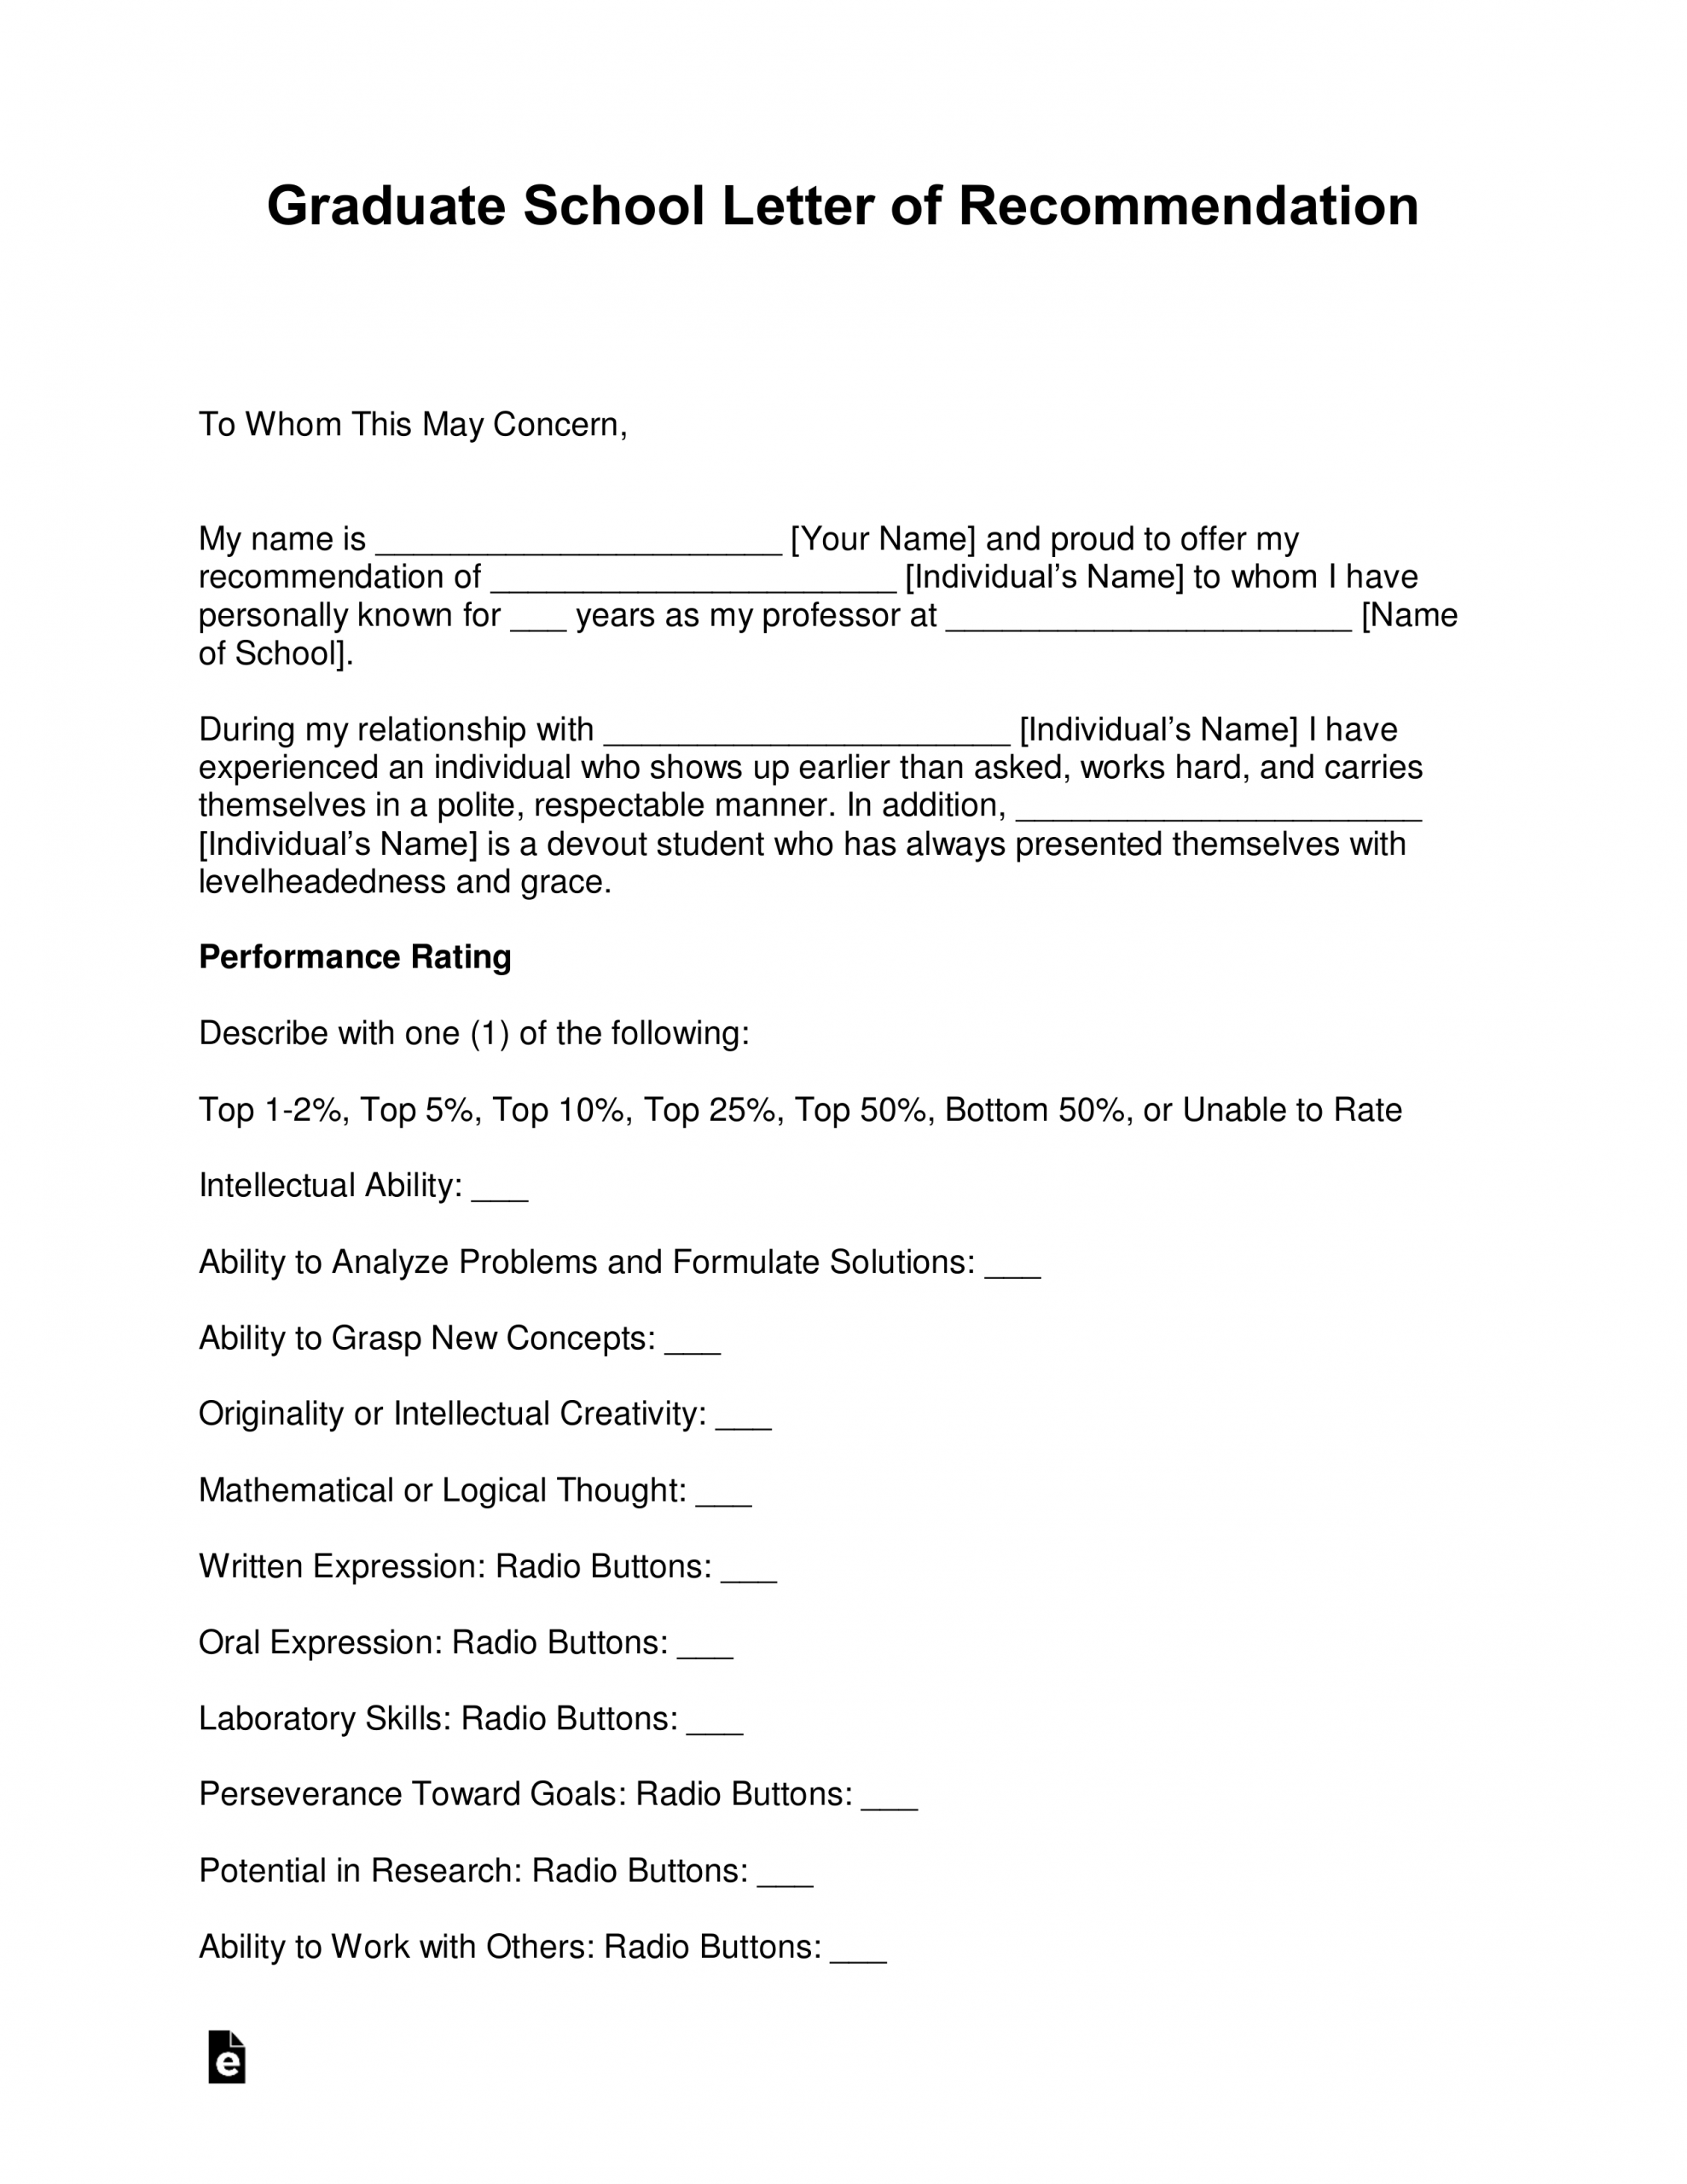 Free Graduate School Letter Of Recommendation Template inside sizing 2550 X 3301